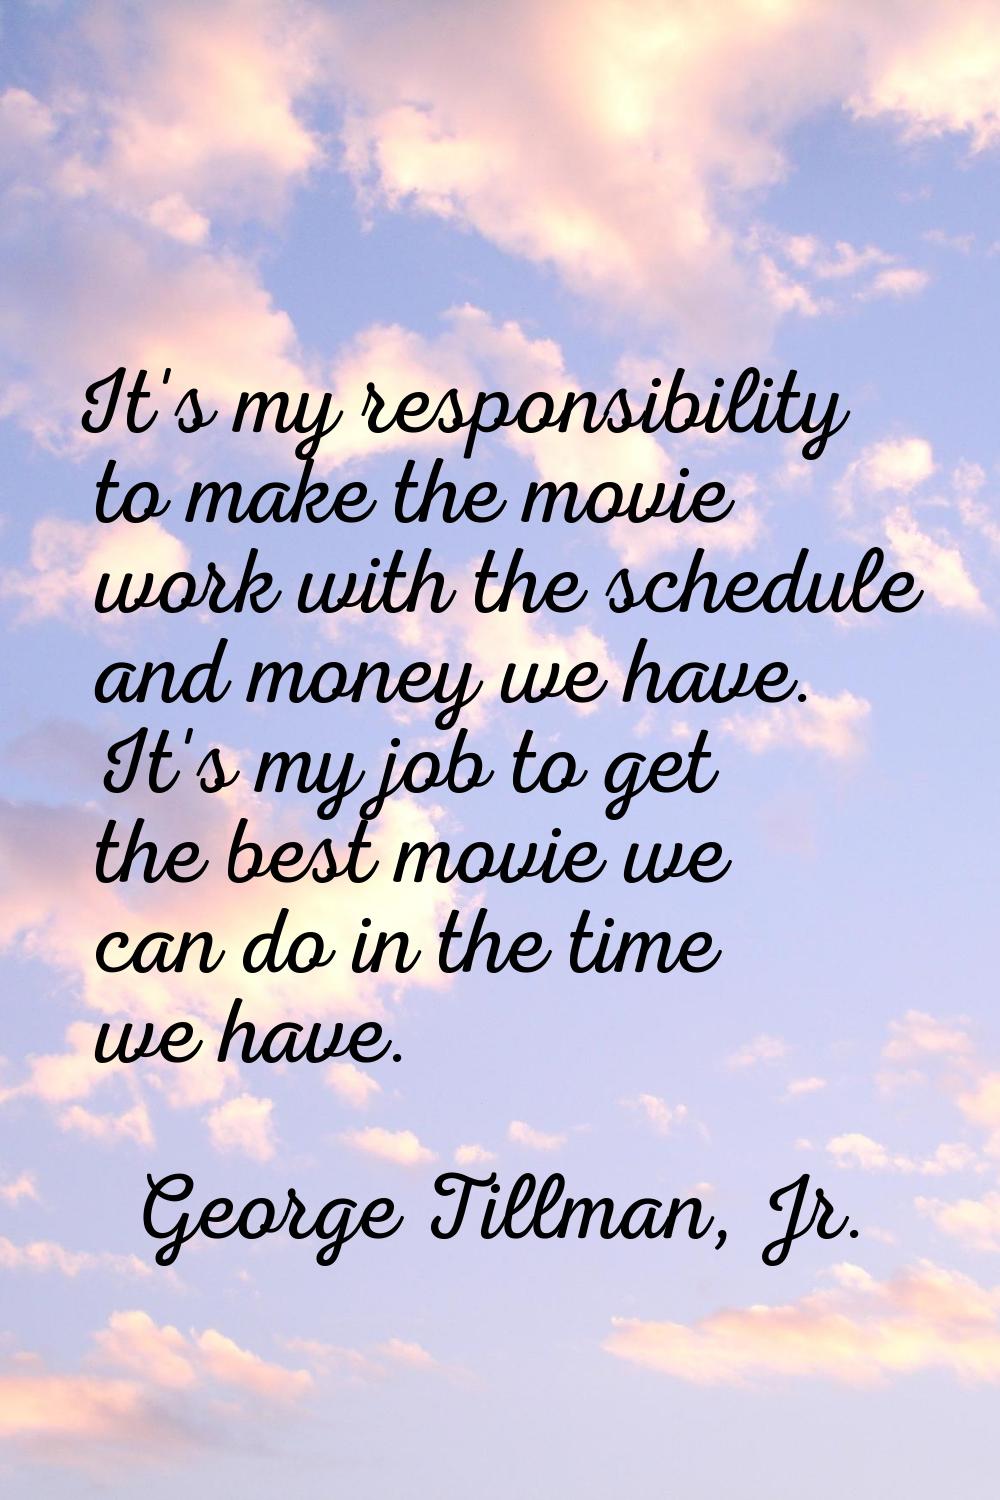 It's my responsibility to make the movie work with the schedule and money we have. It's my job to g